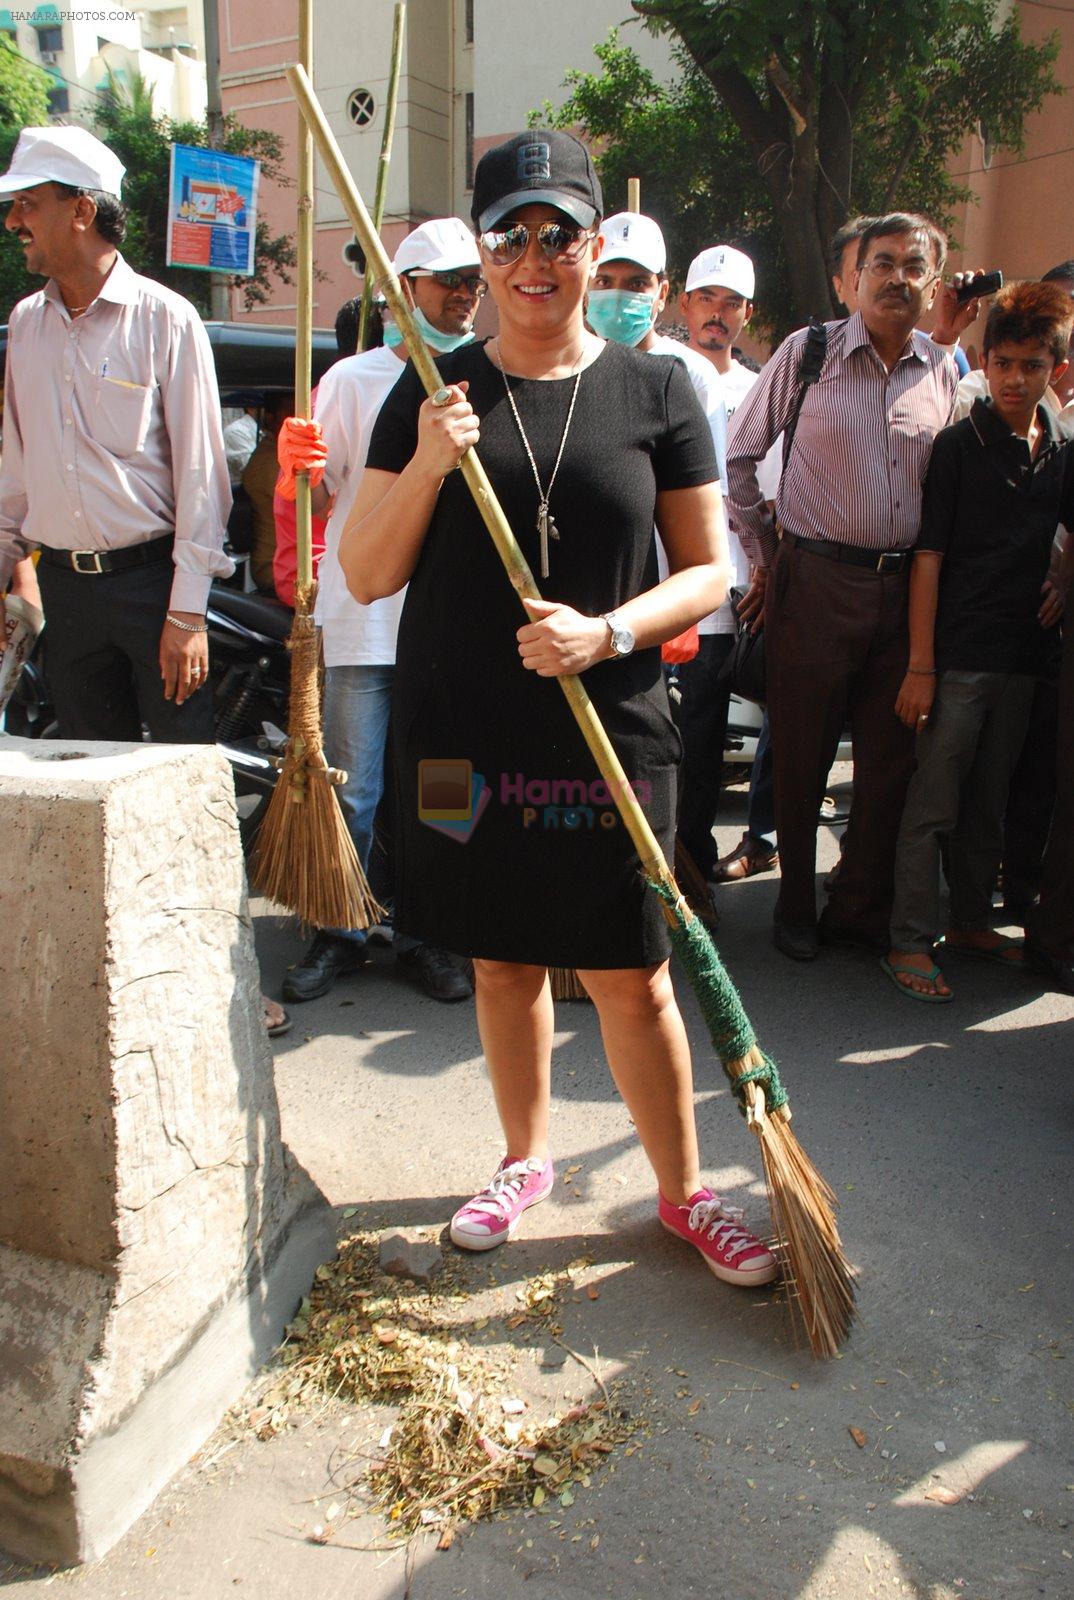 Mahima Chaudhry at cleanliness drive by Nahar Group in Powai on 2nd Nov 2014